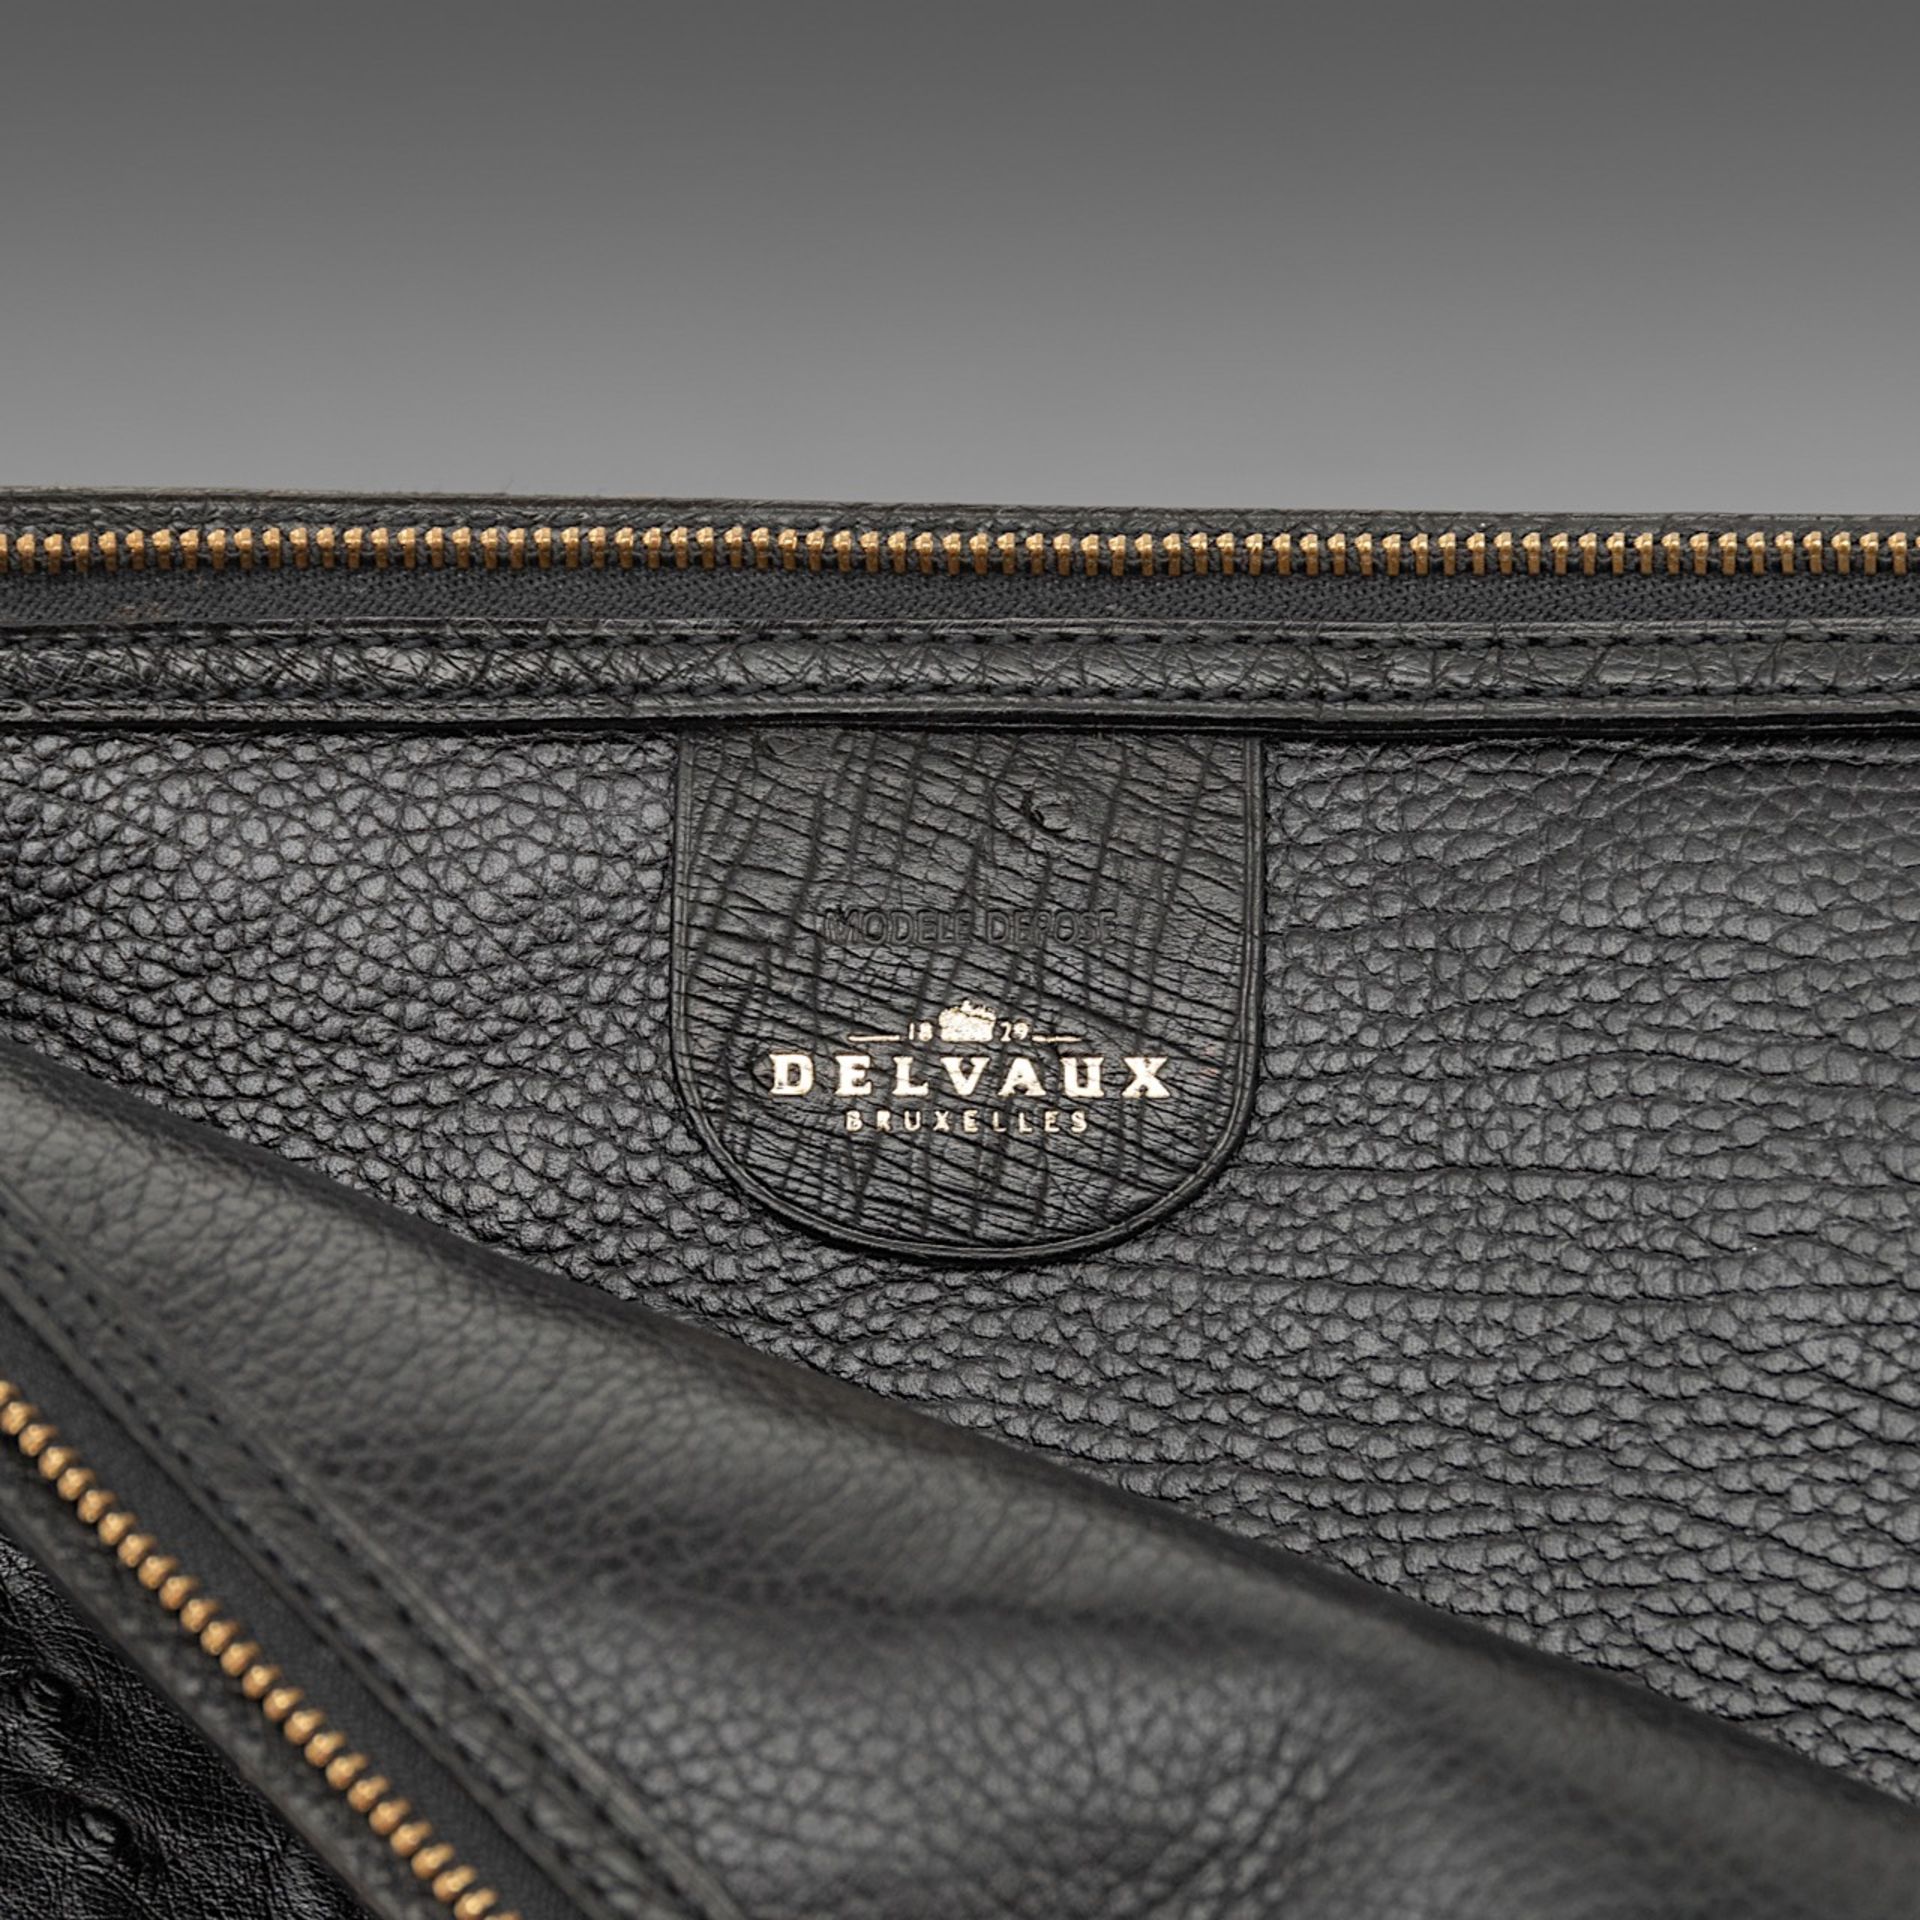 A matching collection of a Delvaux shoulder bag, a clutch and a wallet in black ostrich leather. - Image 10 of 16